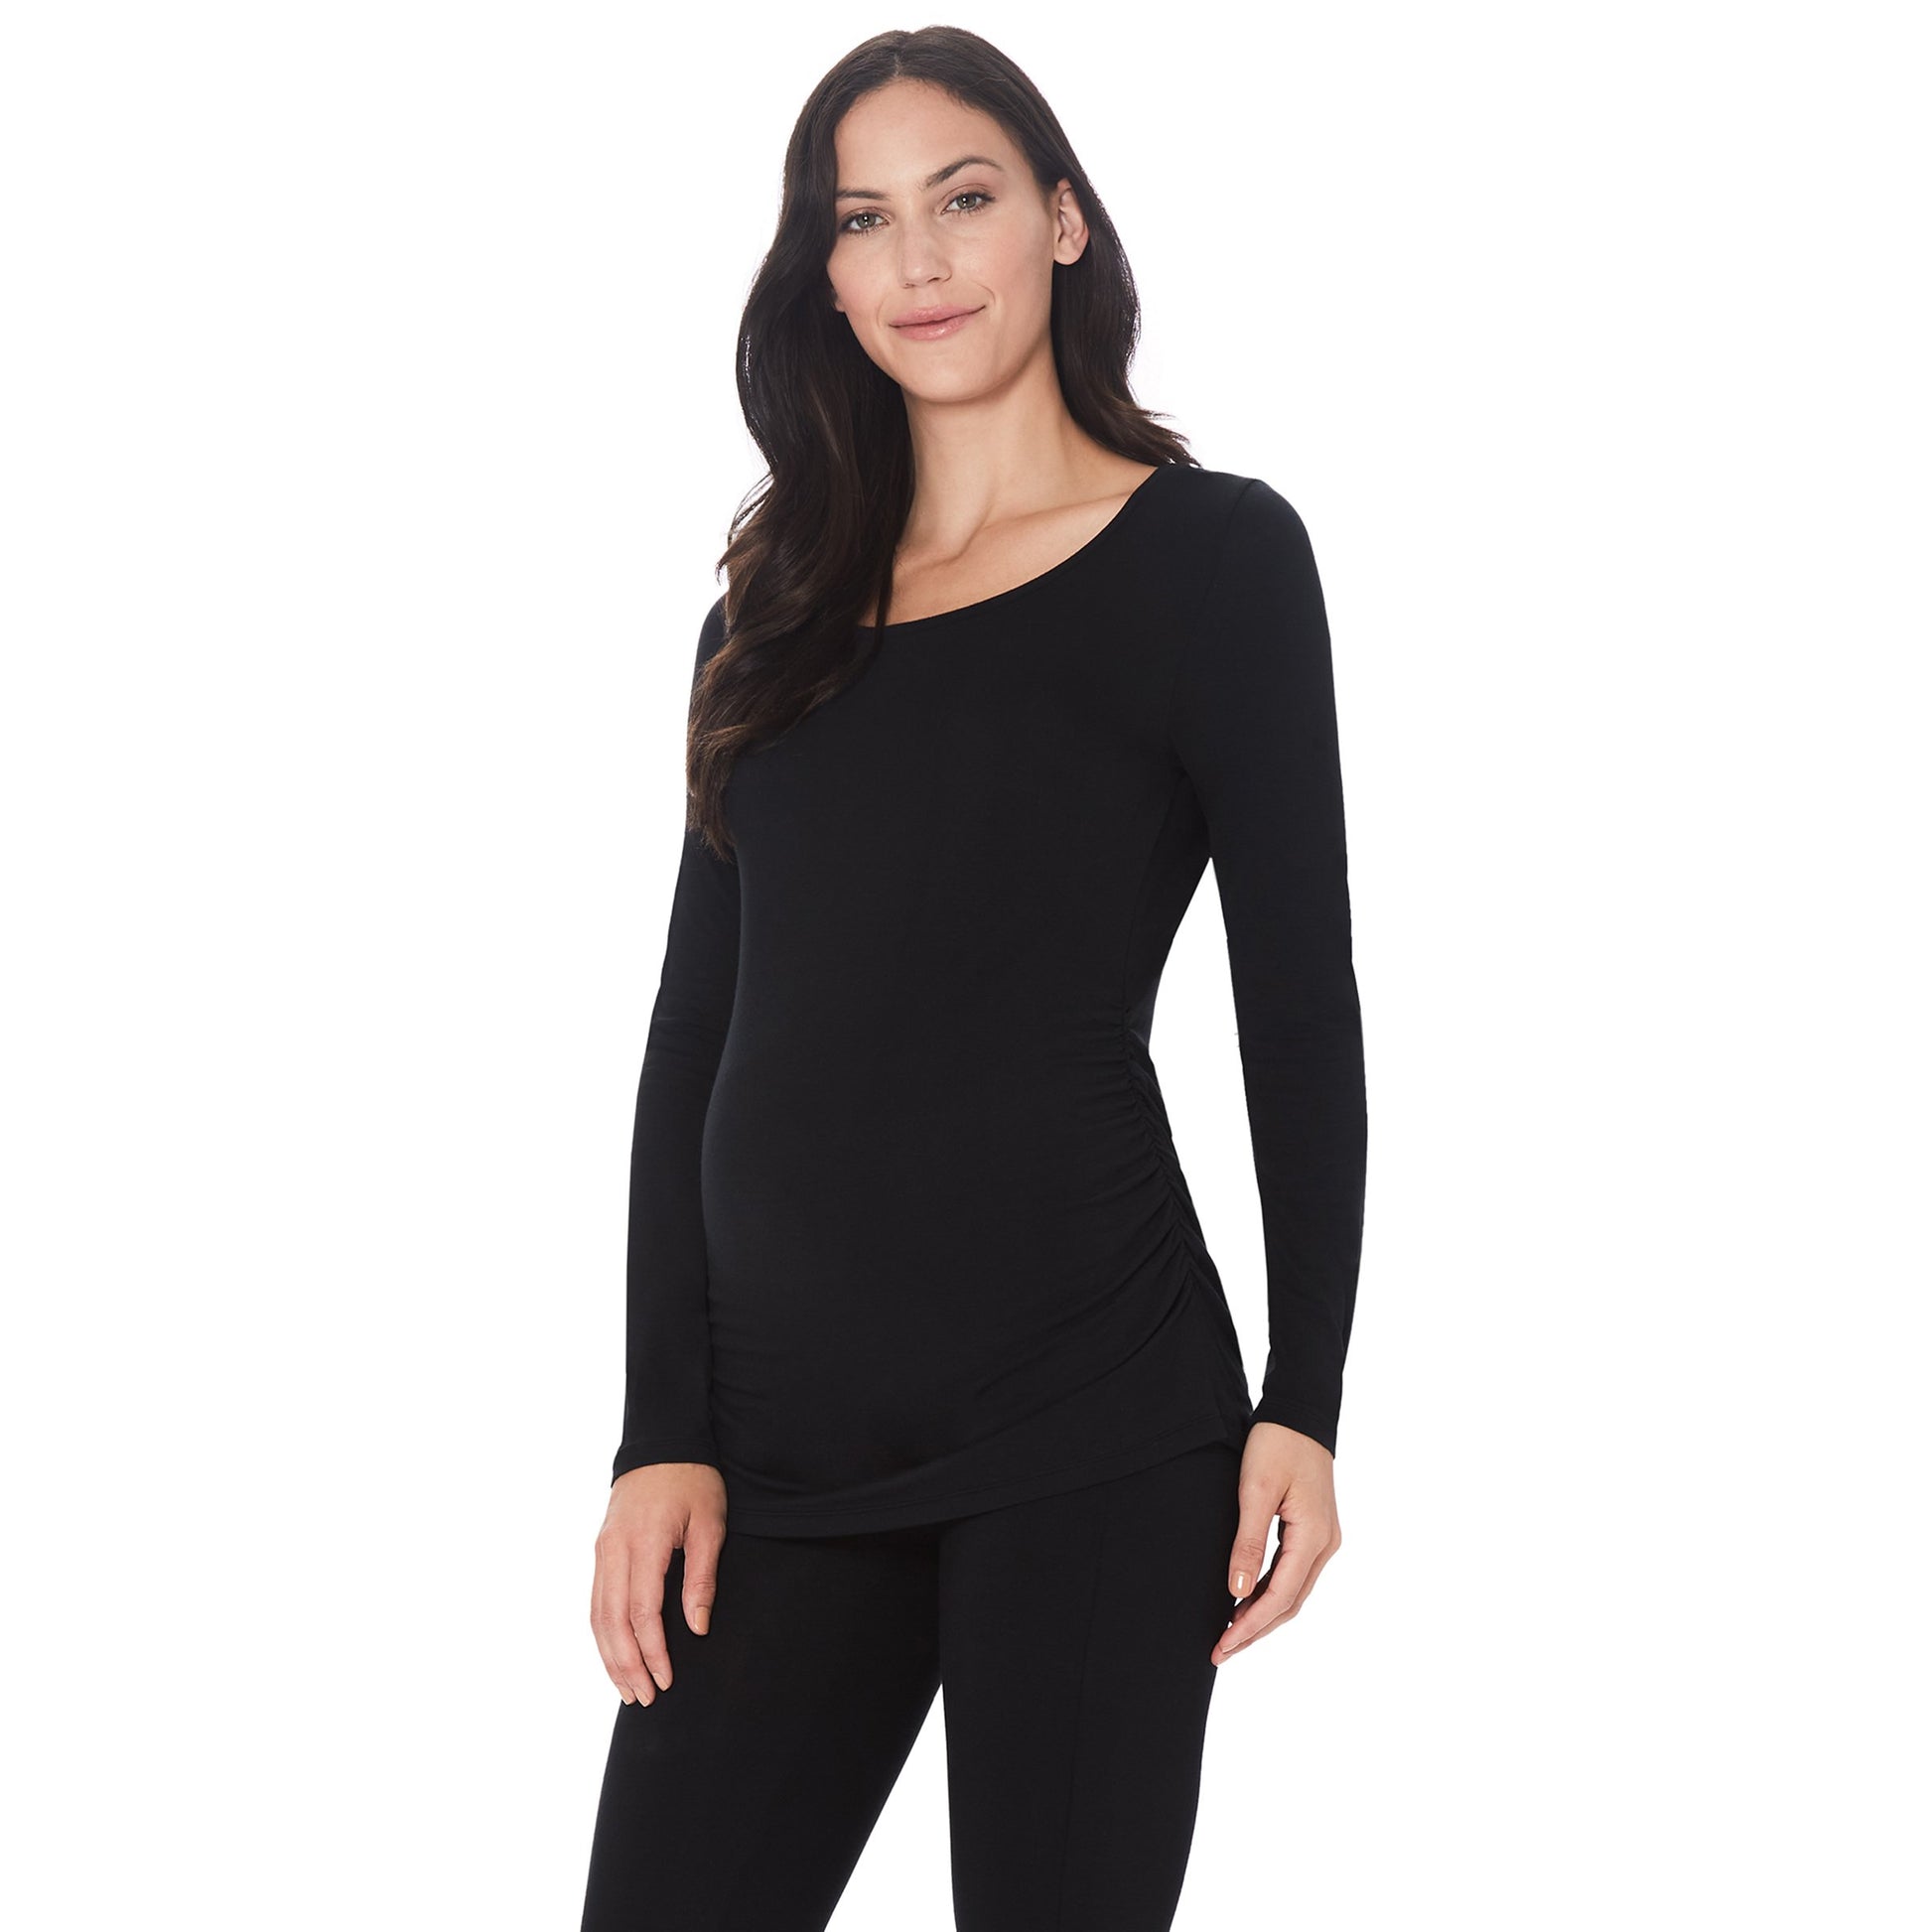 Black;Model is wearing a size S. She is 5’11”, Bust 34”, Waist 30.5”, Hips 40”.#Model is wearing a maternity bump.@ A lady wearingSoftwear with Stretch Maternity Ballet Neck Top with Black print